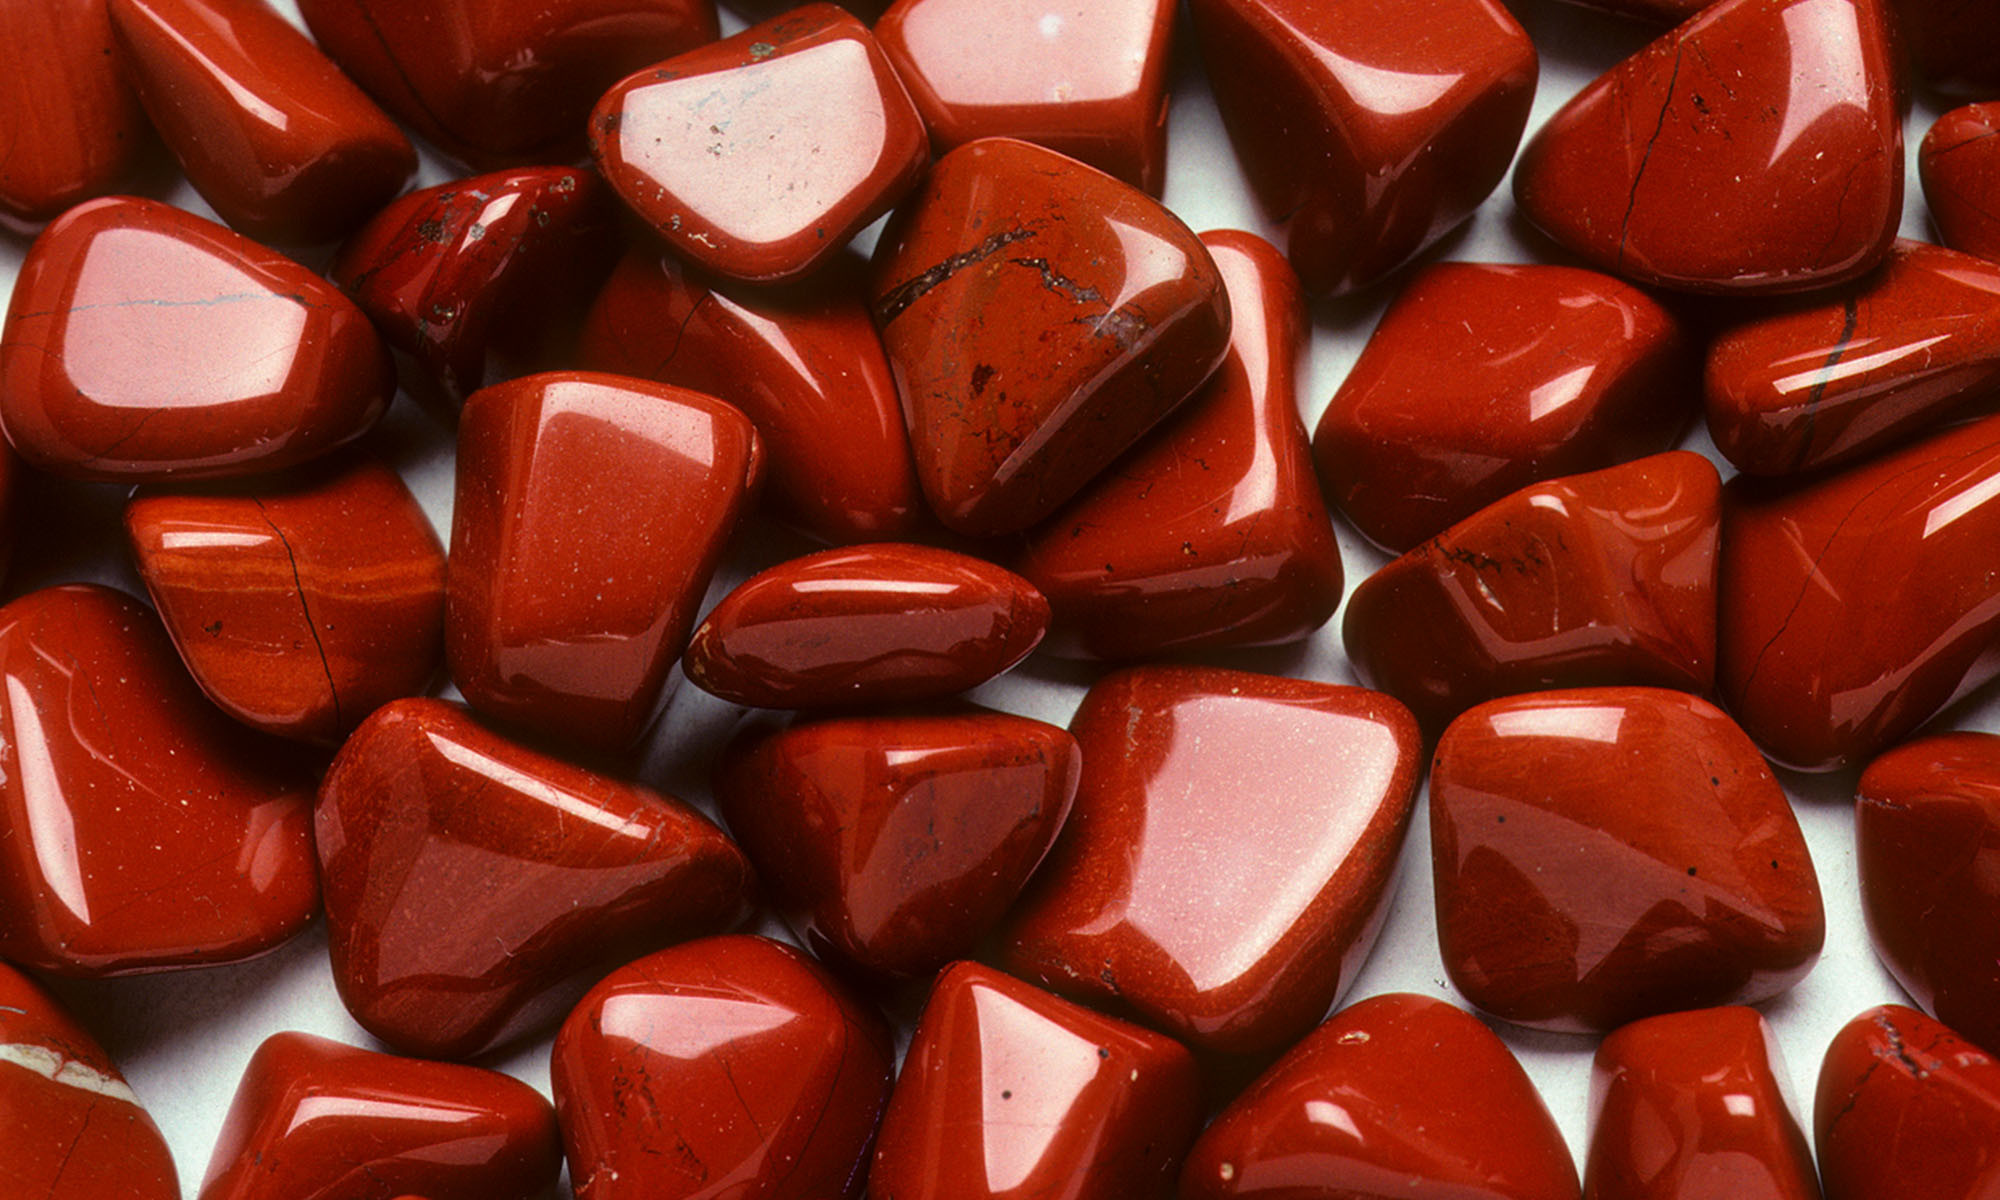 Red Jasper Crystal: Healing Properties, How To Use It & More